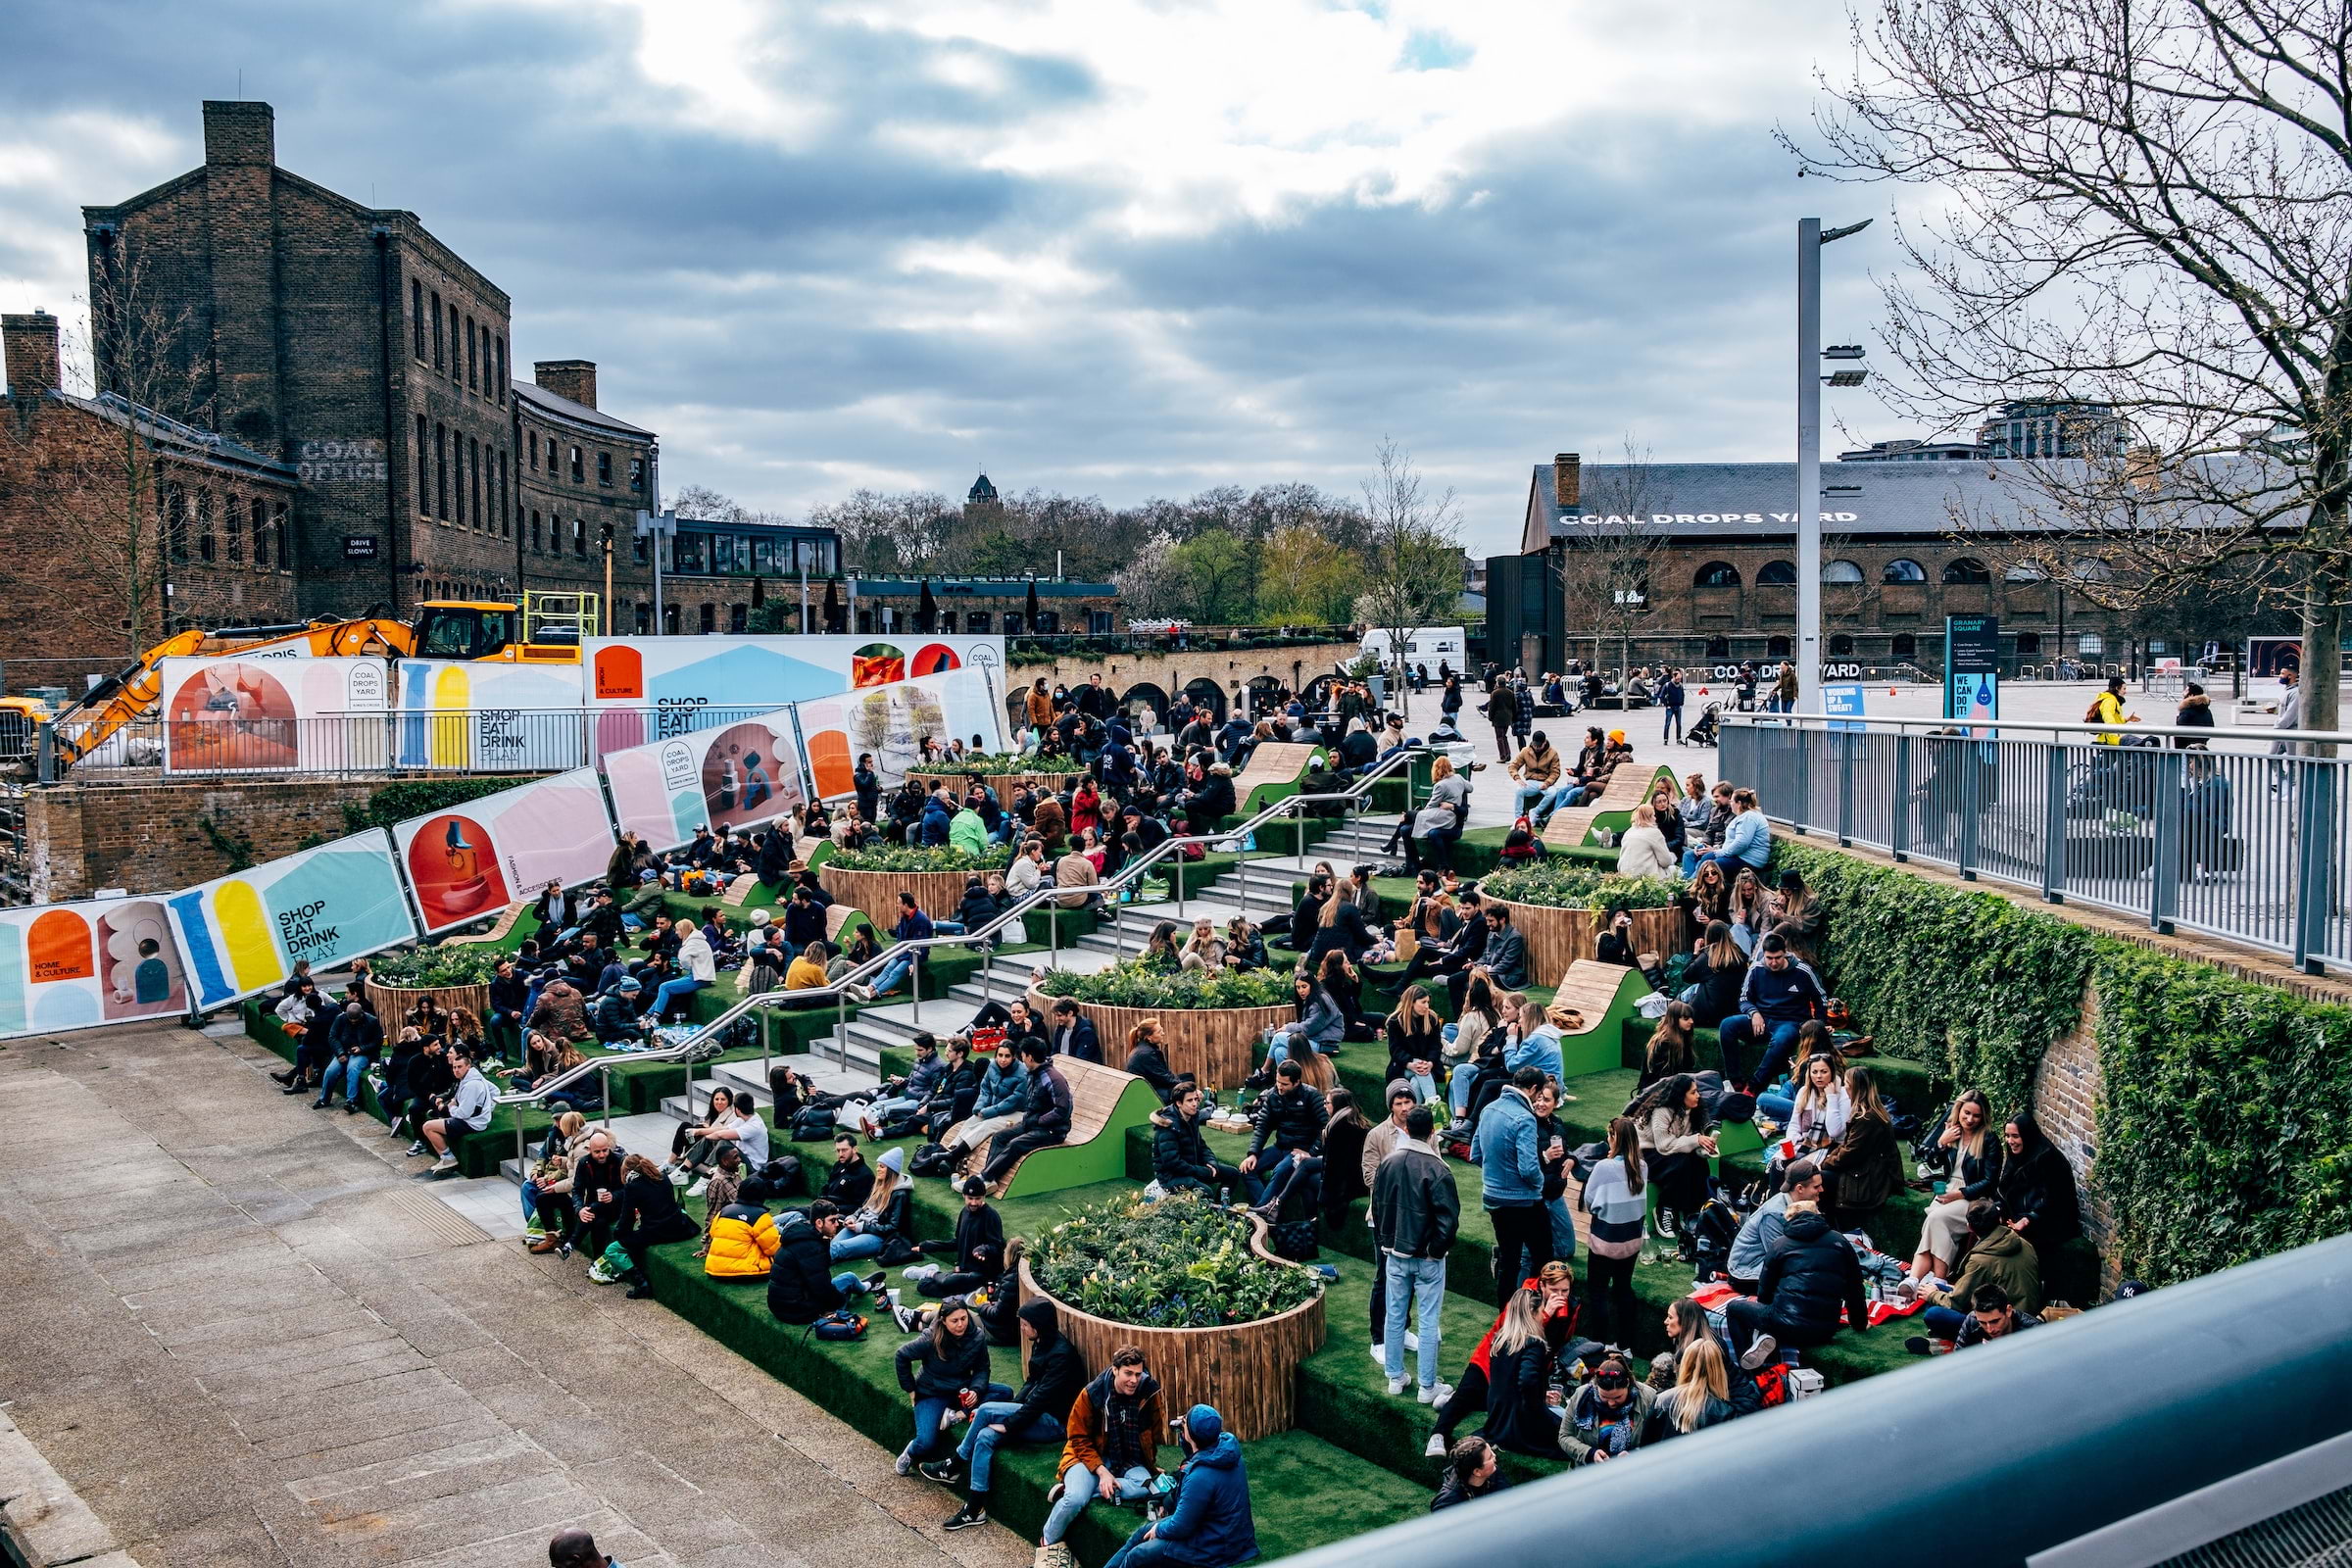 How to spend a day in King's Cross